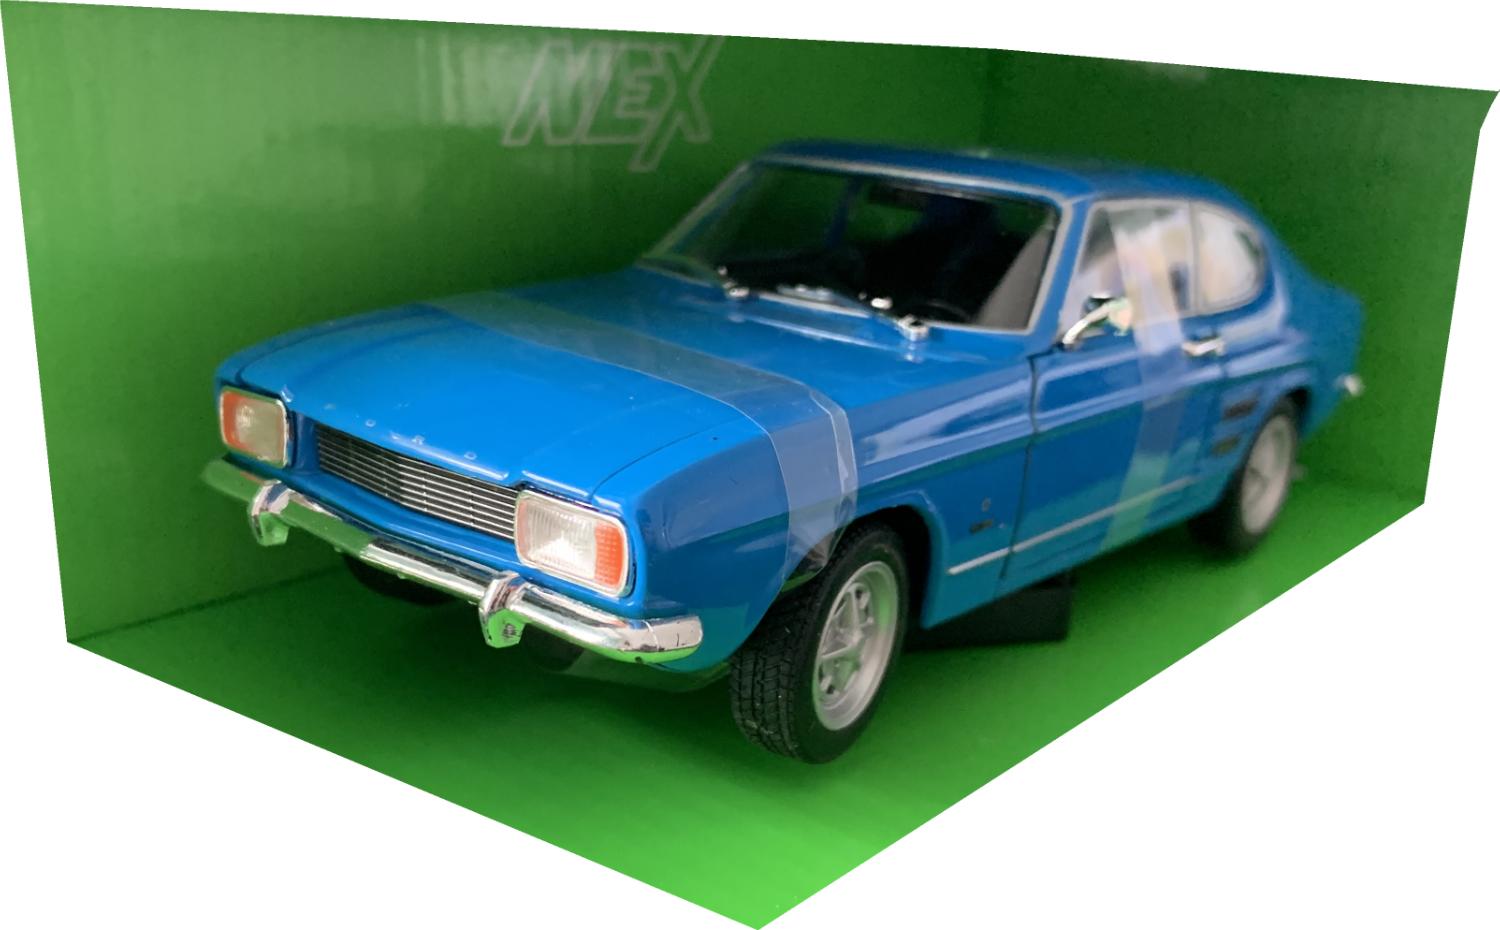 An excellent production of the Ford Capri GT with high level of detail throughout, all authentically recreated. Model is mounted on a removable plinth and presented in a window display box. The car is approx. 17 cm long and the presentation box is 24 cm long